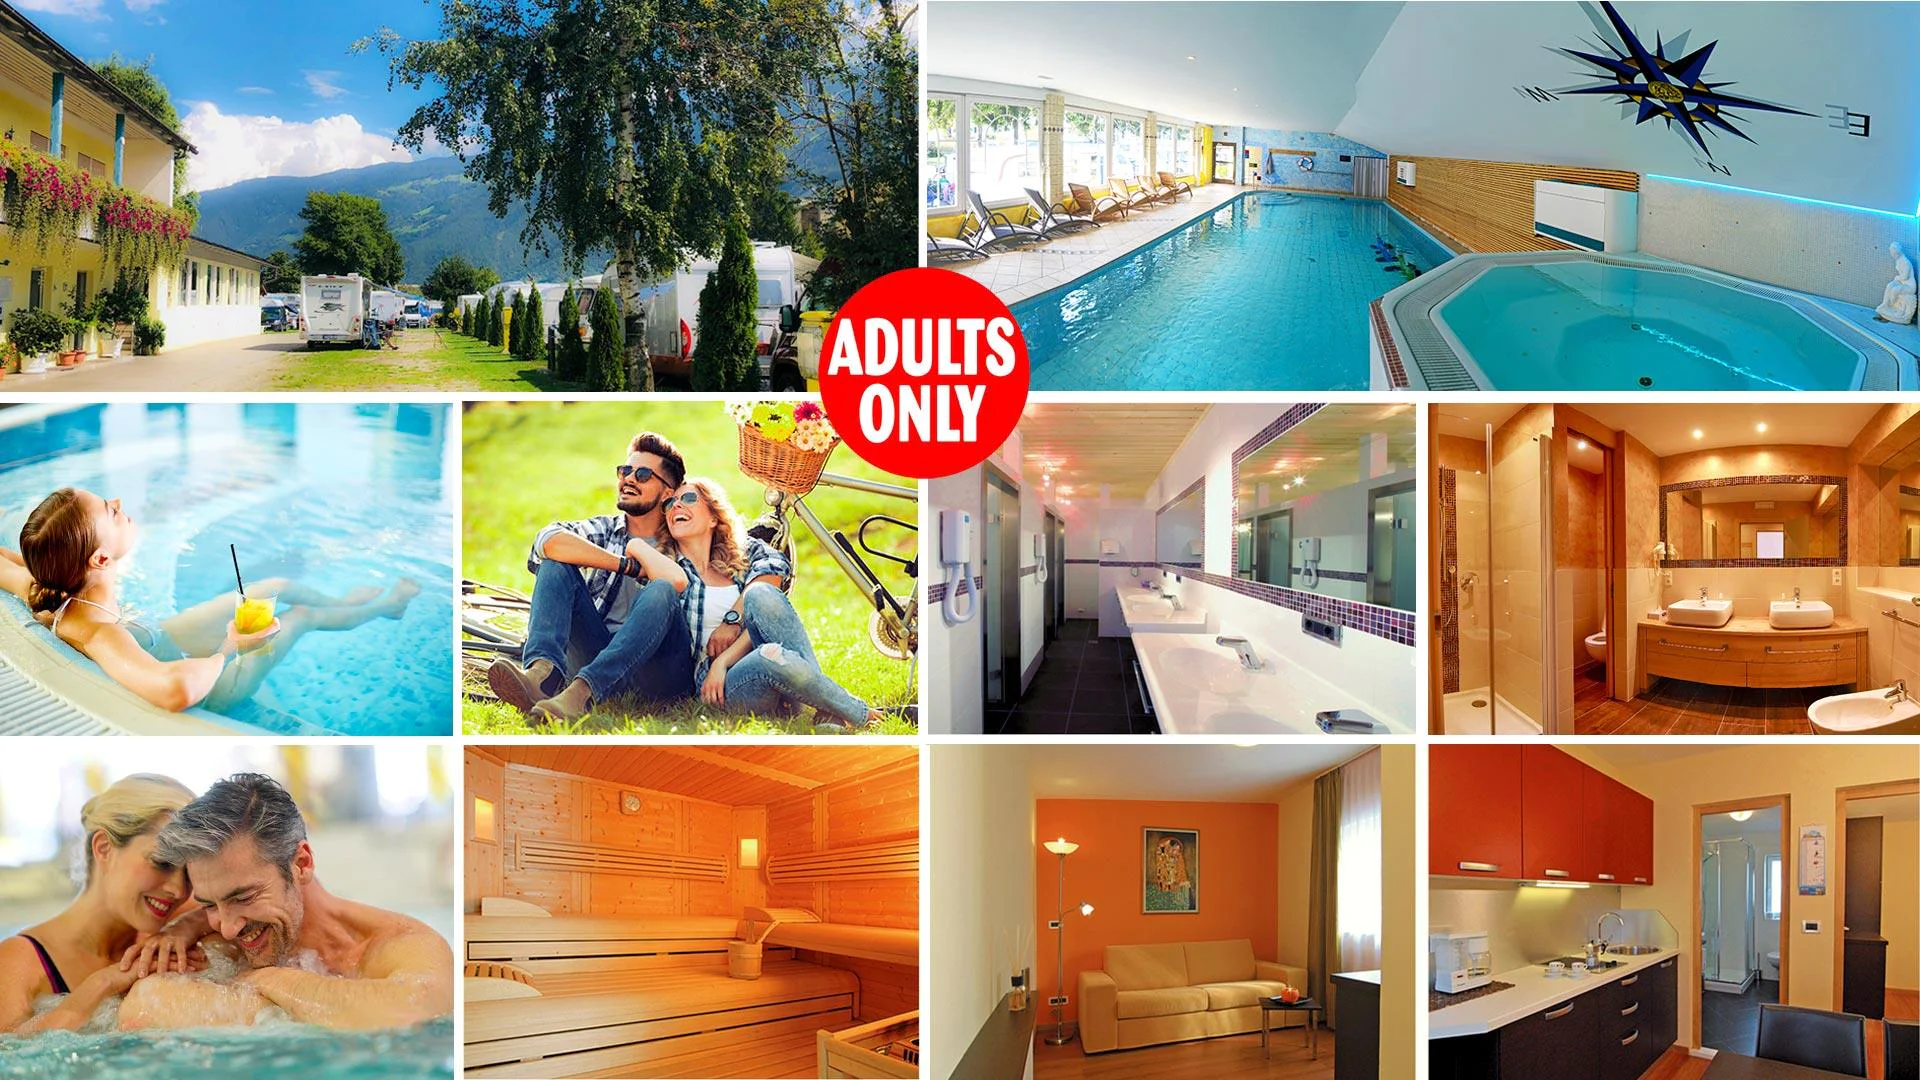 Camping Bungalows Adler - Adults only Naturns 1 suedtirol.info